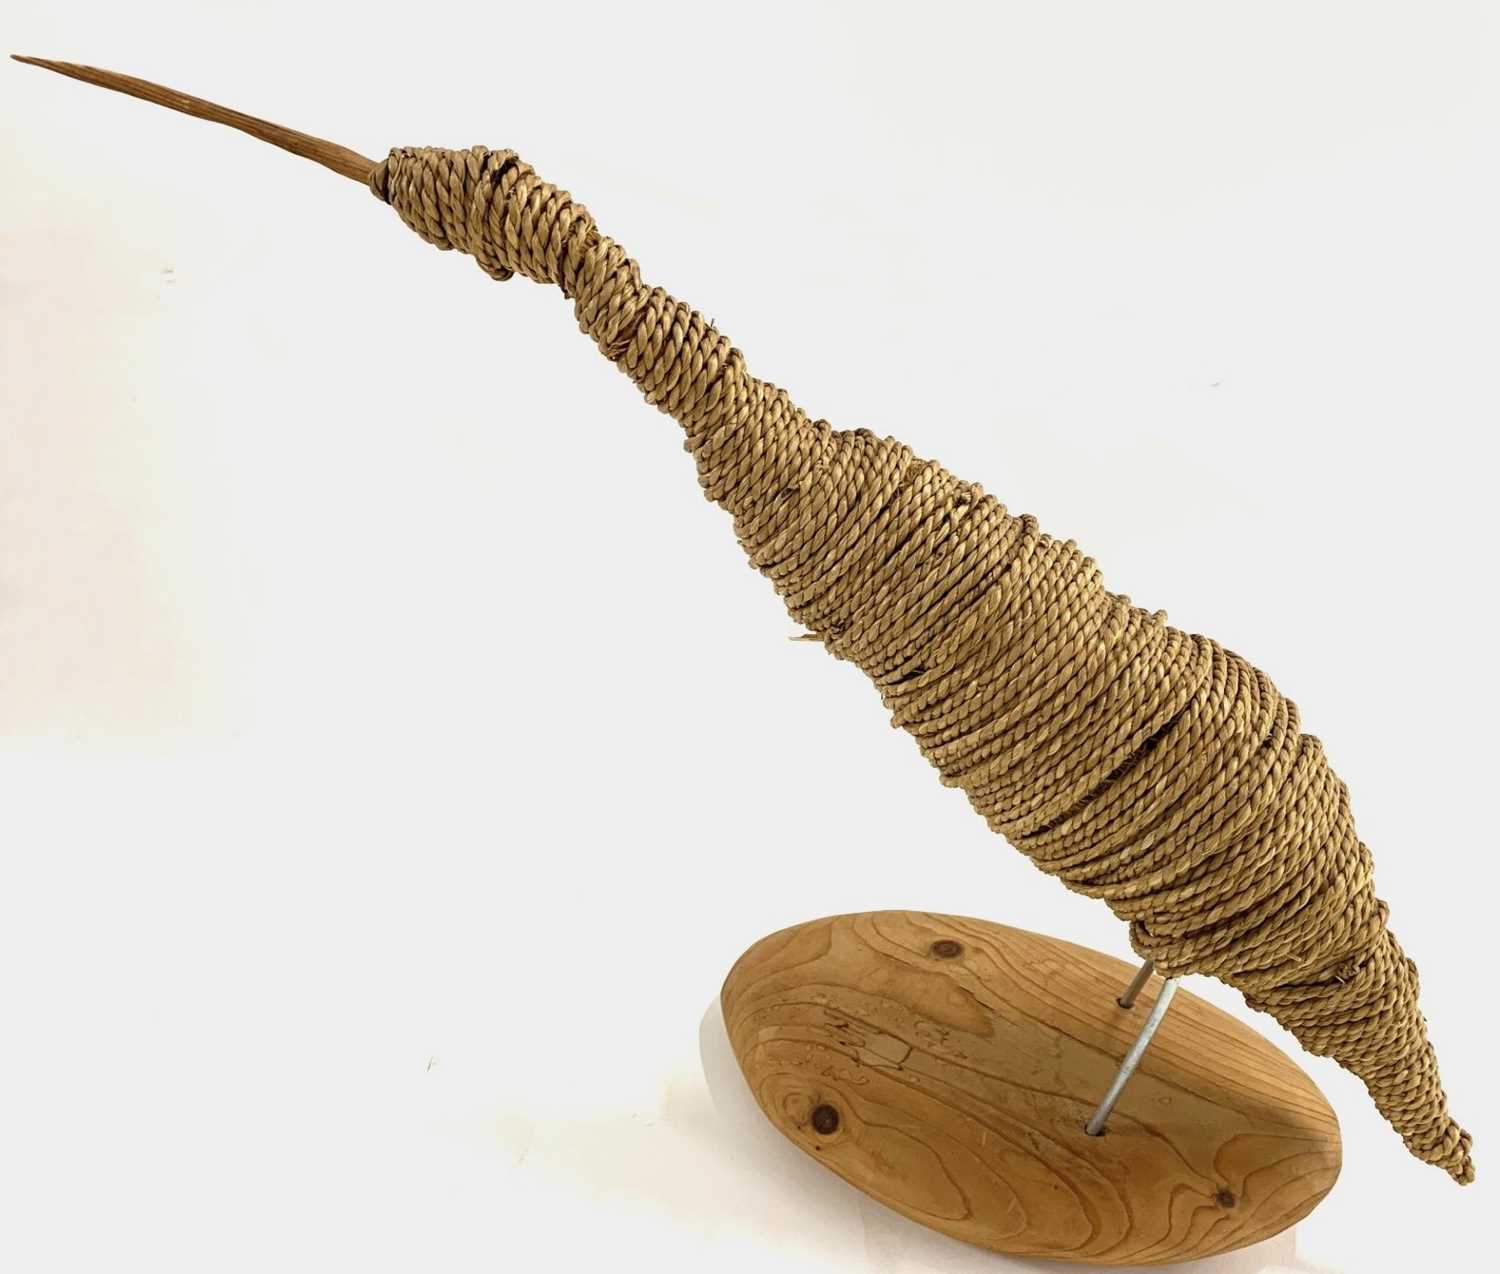 British contemporary, Natural cord twine wader bird sculpture on wooden base, 60 cm length x 45cm (